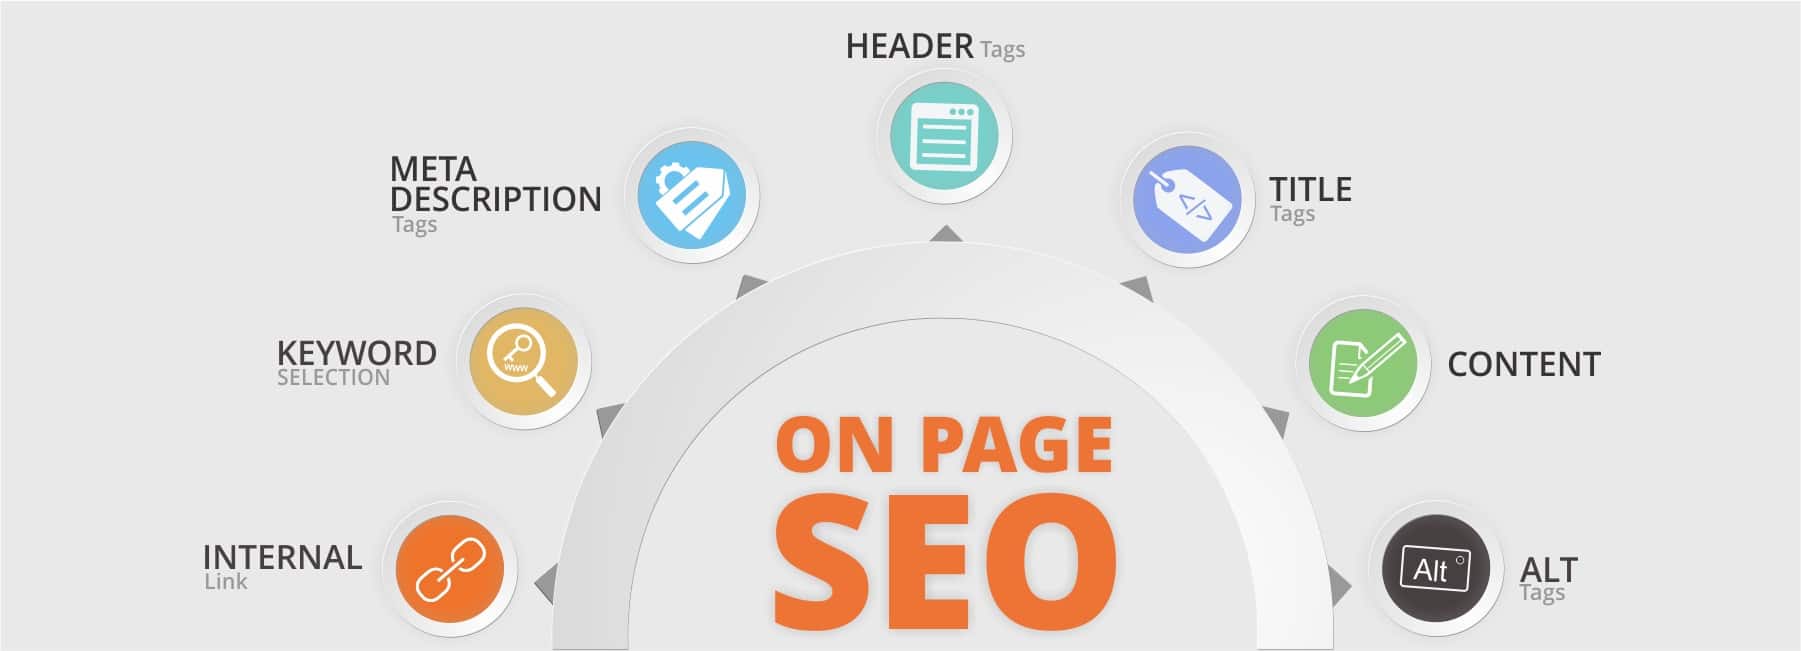 Effective elements in internal SEO or ON PAGE SEO